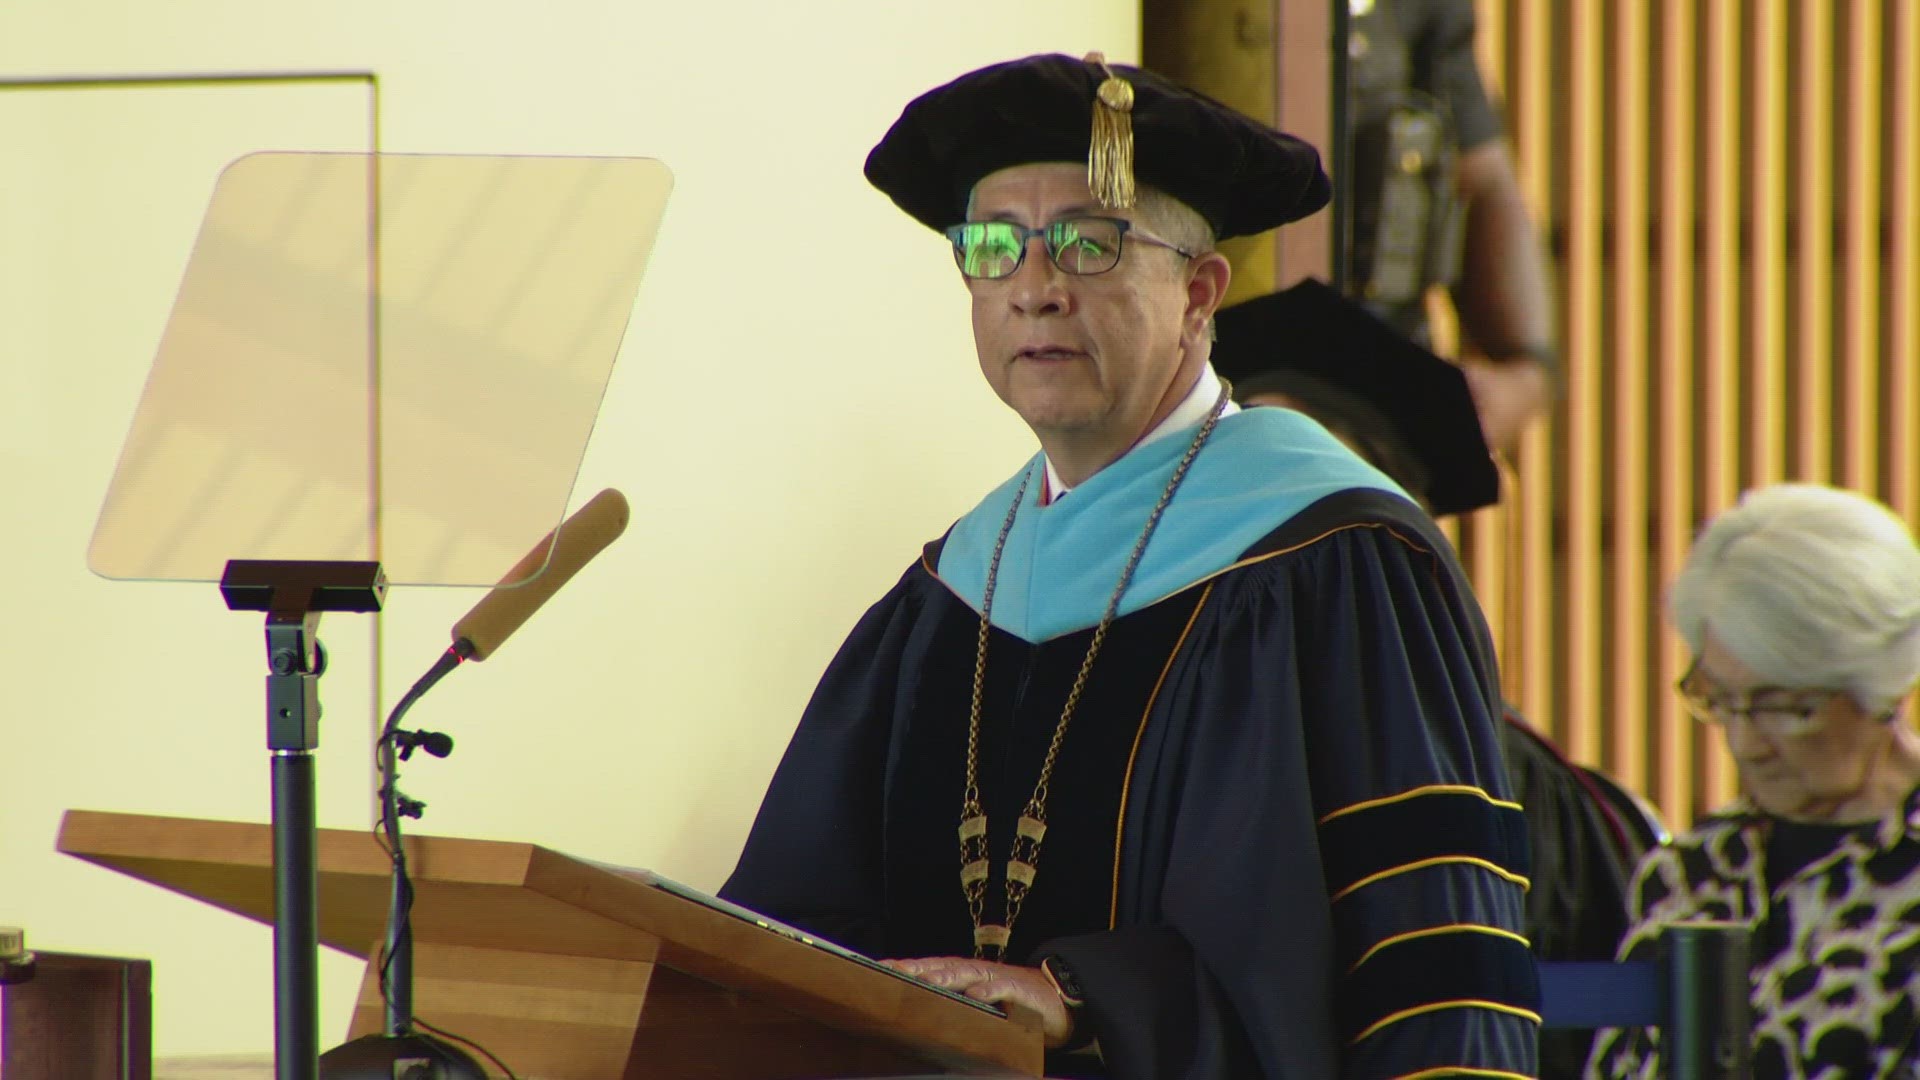 Dr. Salvador Aceves was officially sworn in as Regis University's first Latino president.